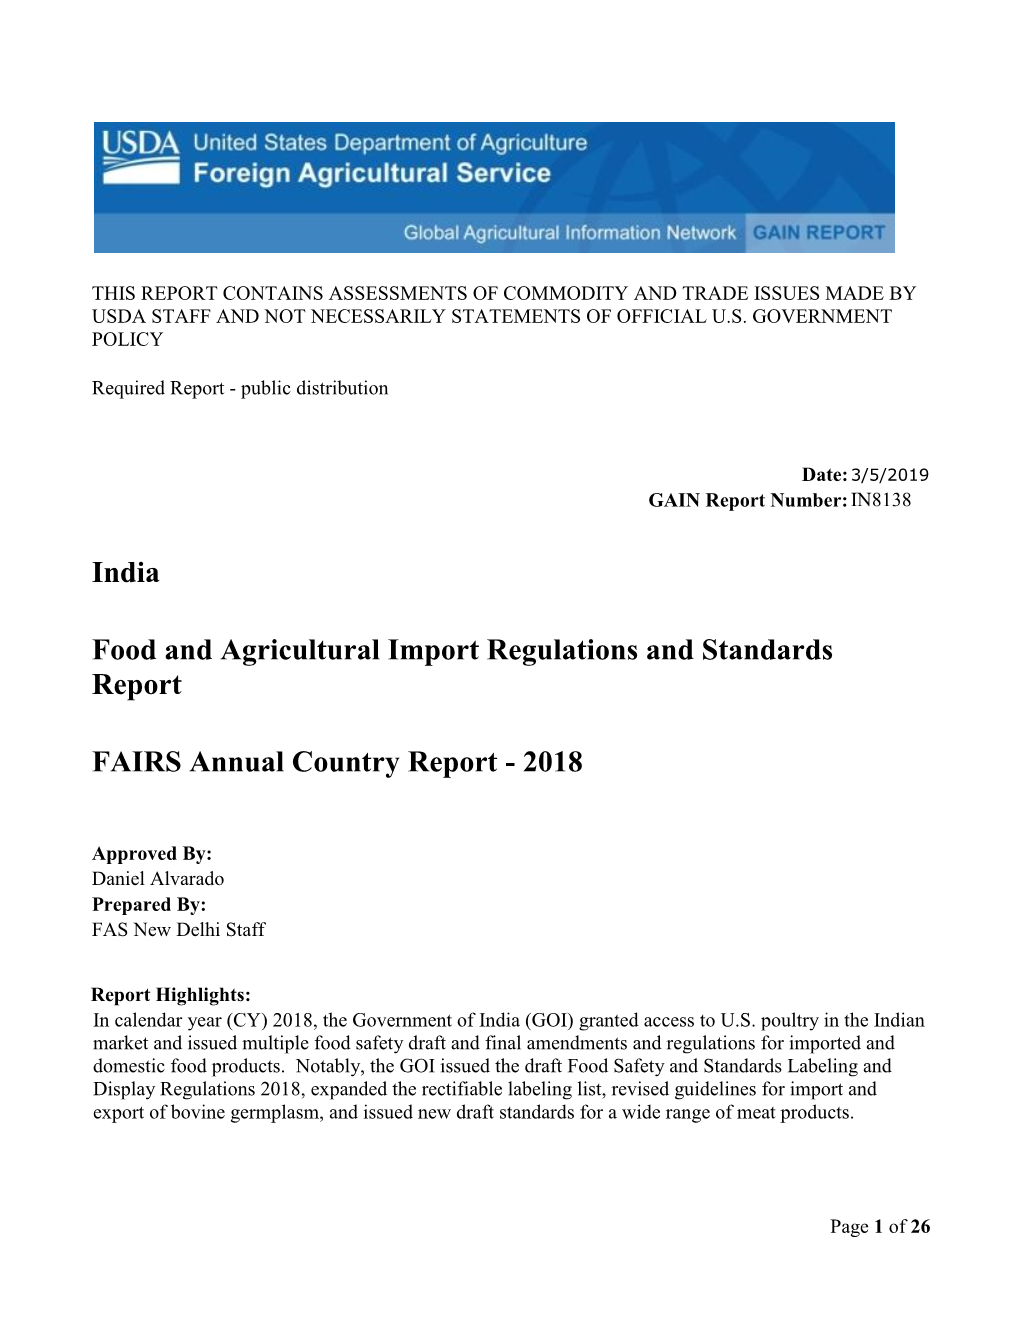 India Food and Agricultural Import Regulations and Standards Report